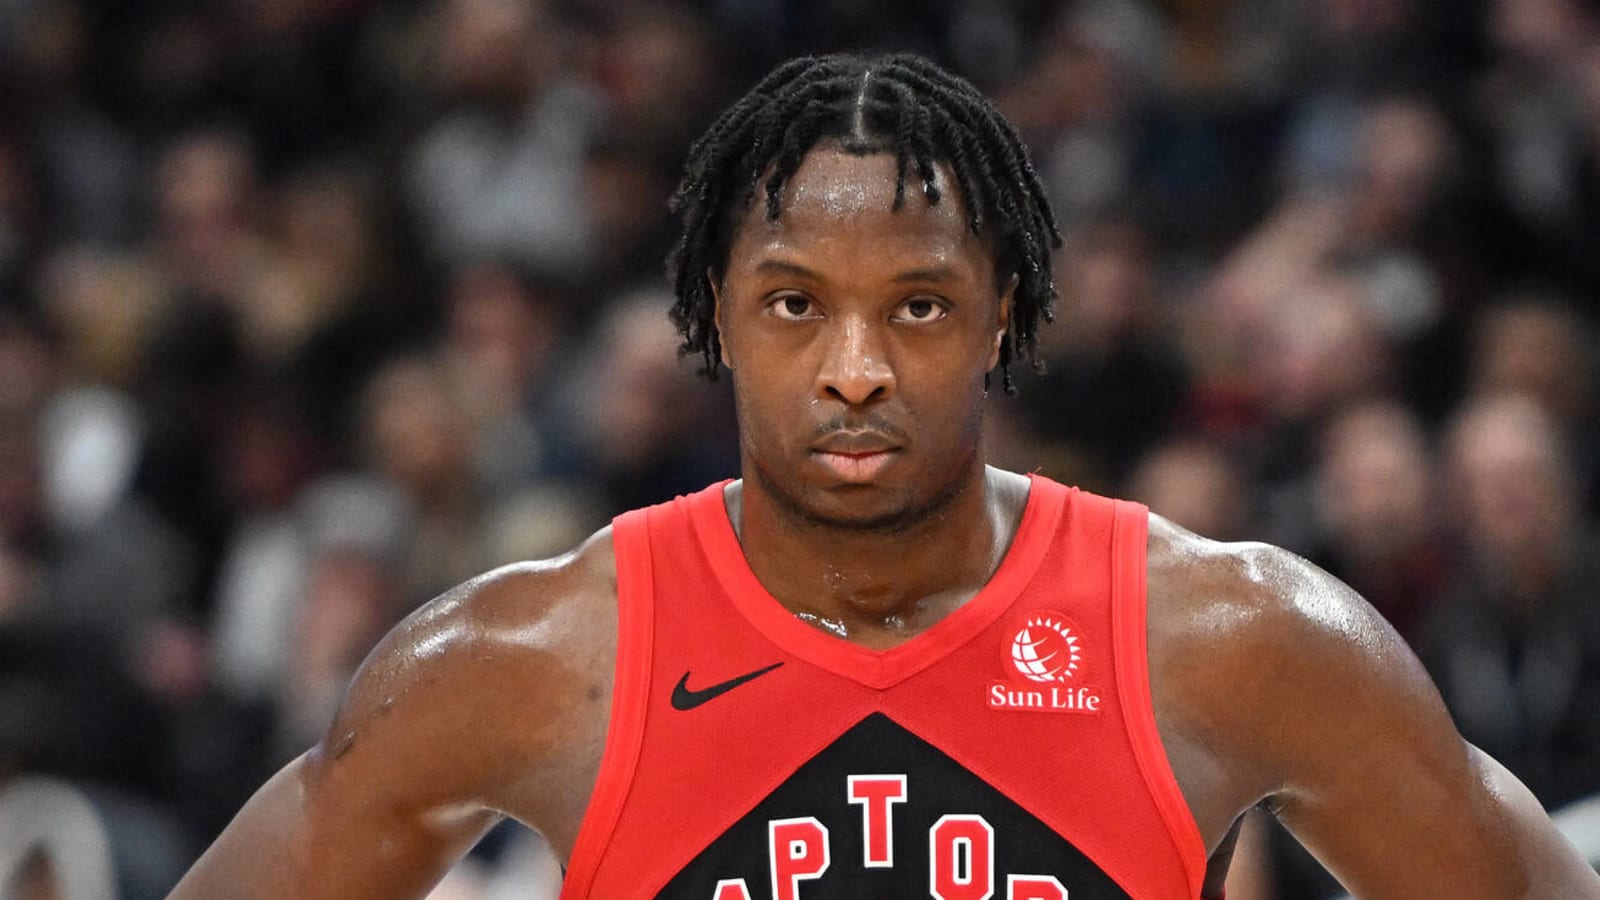 After OG Anunoby trade, Knicks might not be done trading